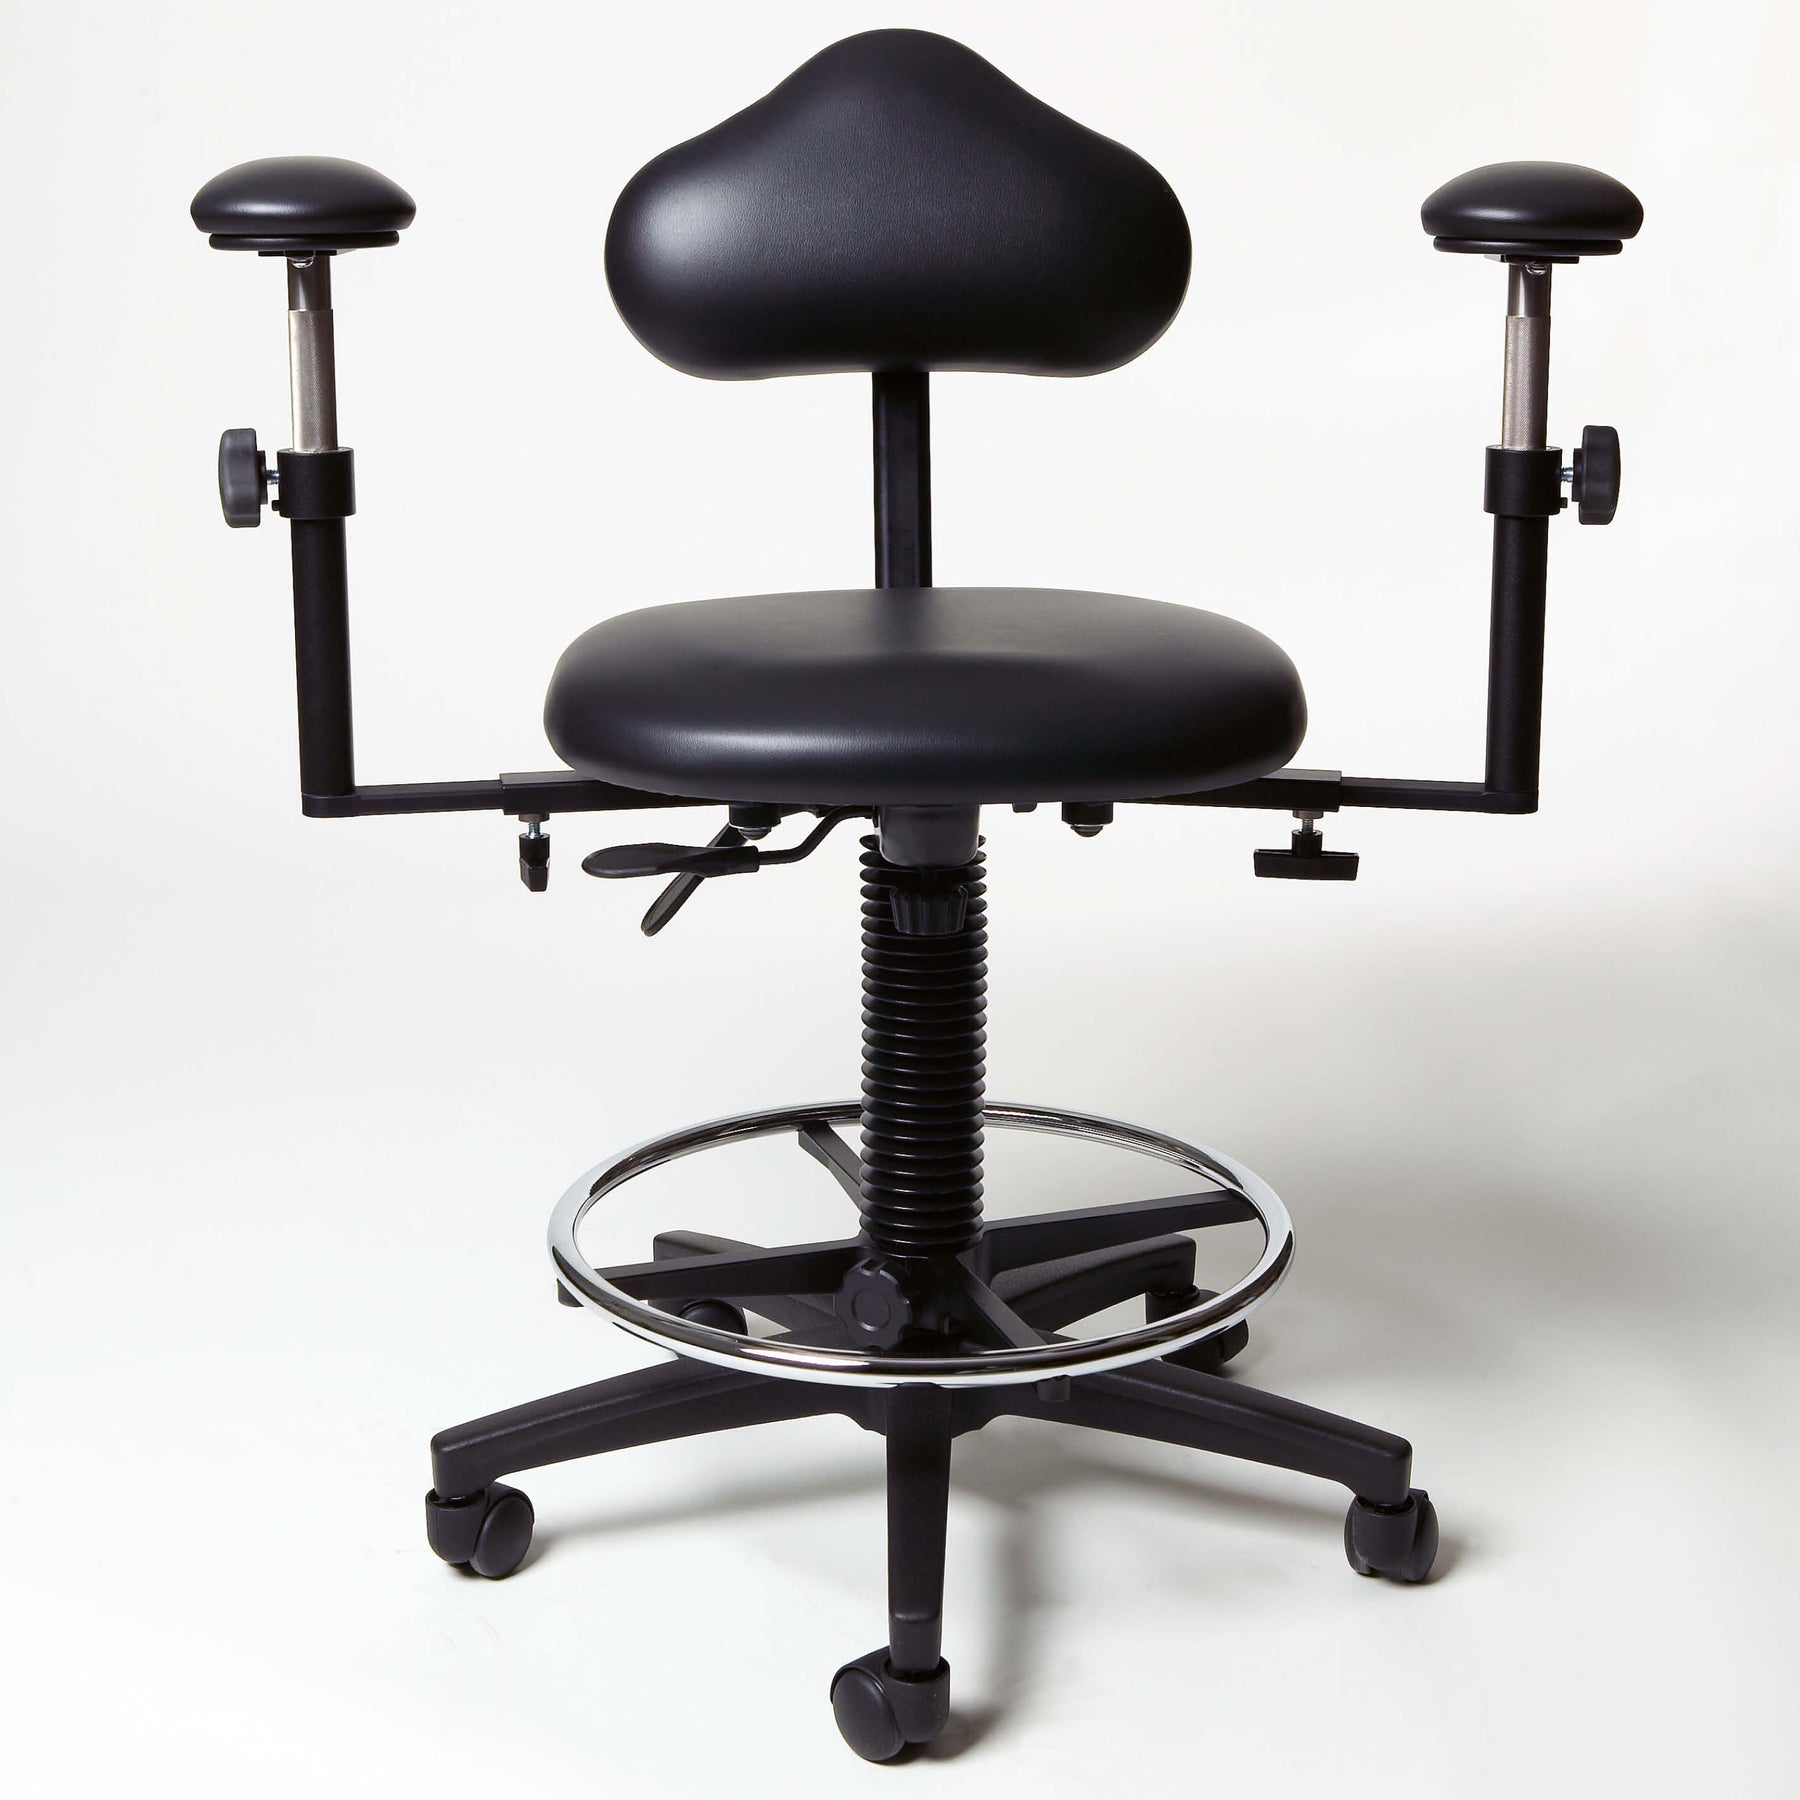 GLOBAL Microsurgeons Chair designed for use when working at a microscope